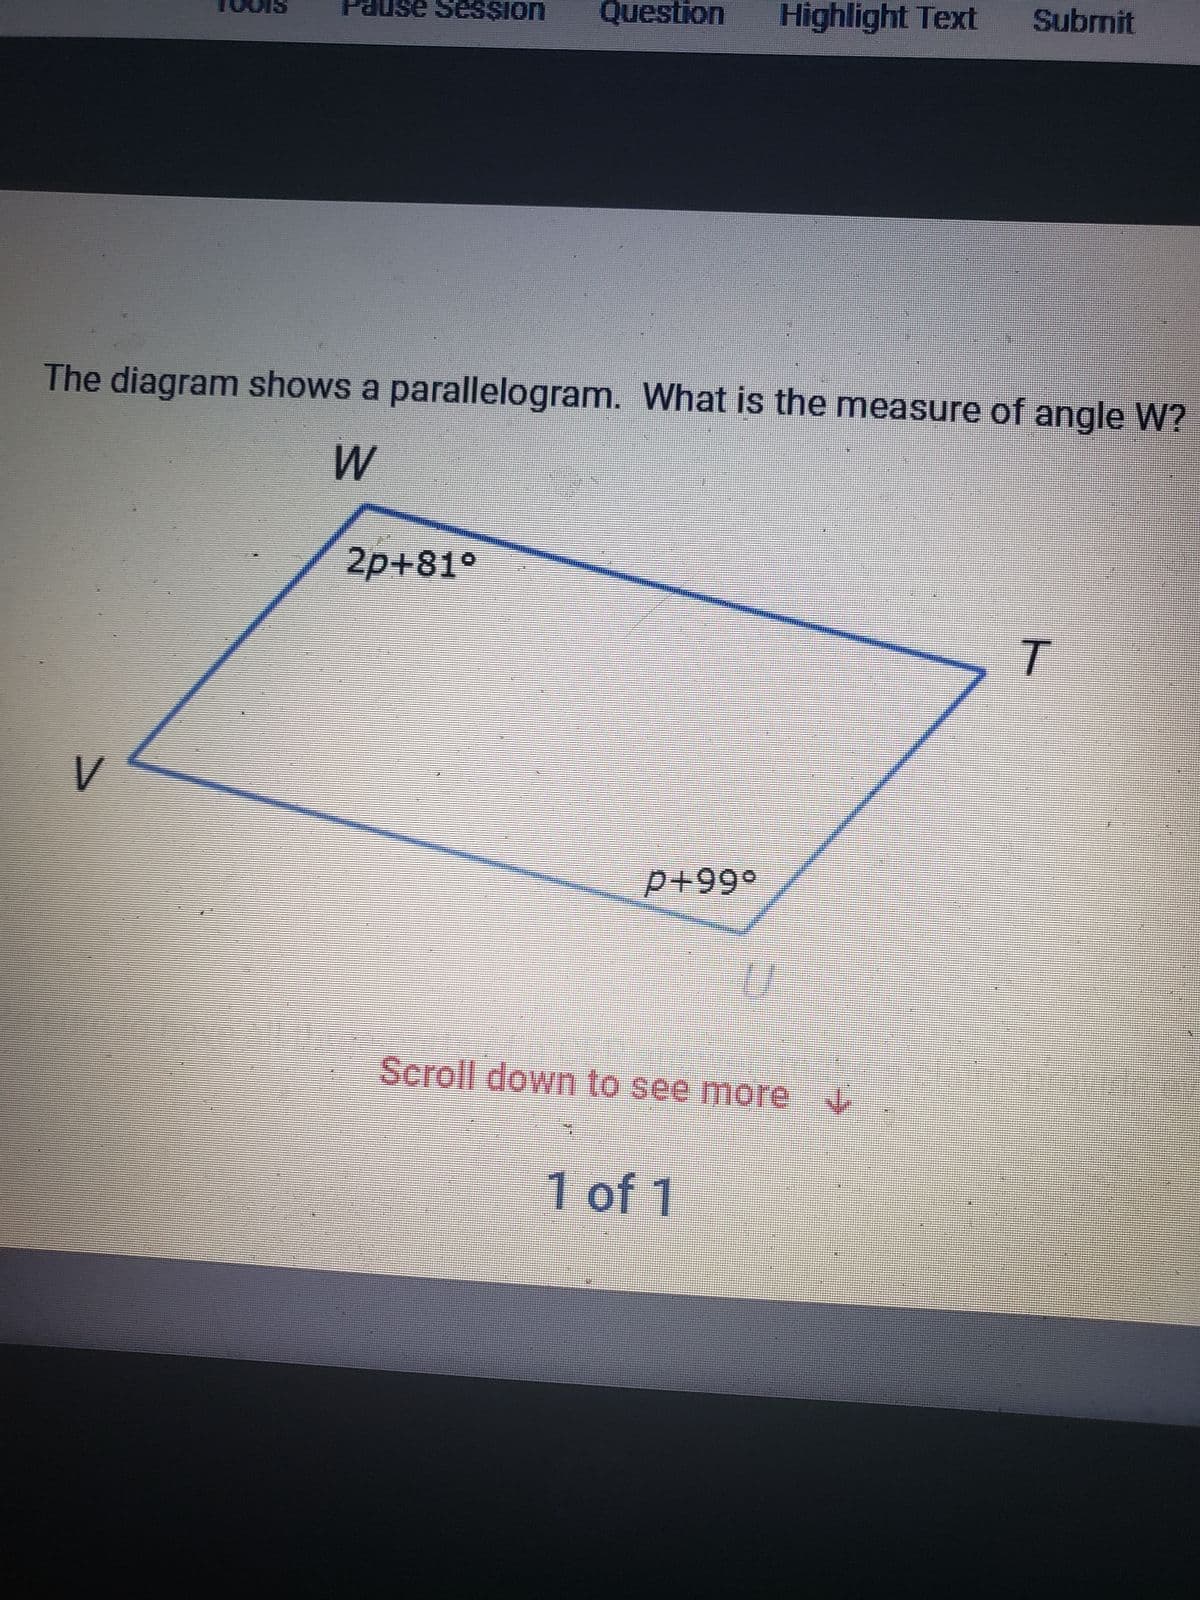 Pause Session Question Highlight Text Submit
The diagram shows a parallelogram. What is the measure of angle W?
W
V
2p+81°
P+99°
Scroll down to see more V
1 of 1